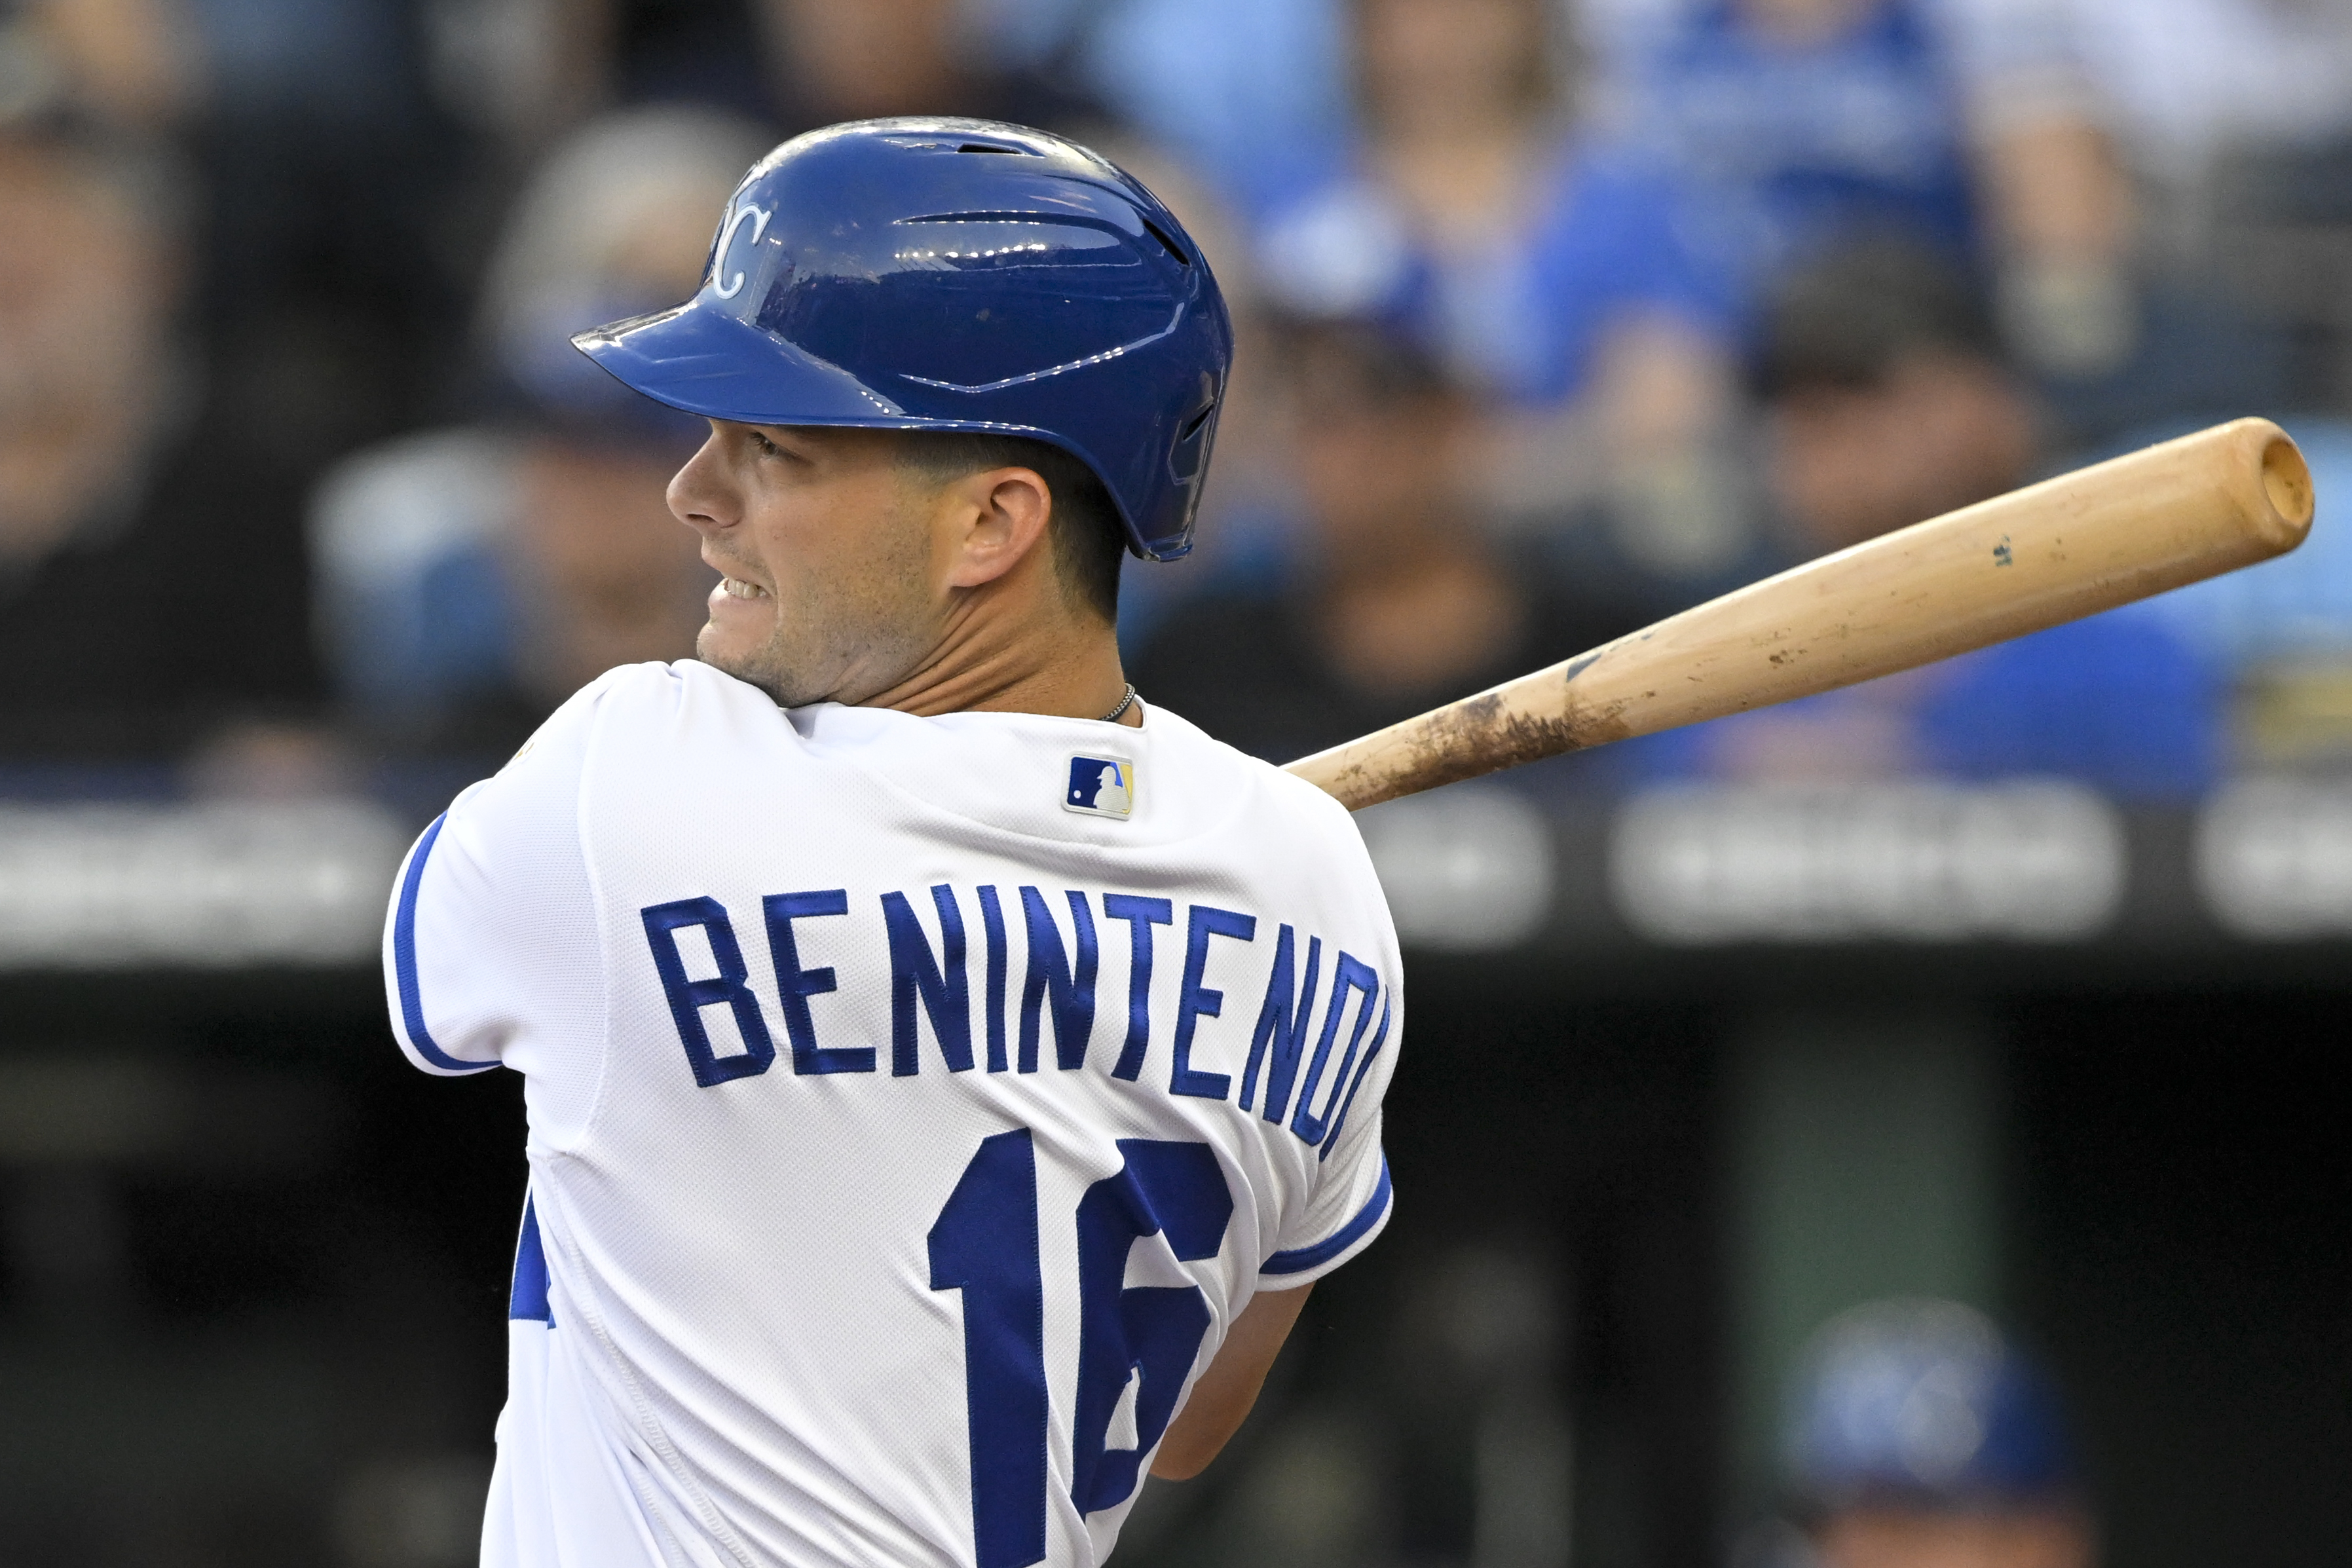 Red Sox OF Andrew Benintendi goes to Royals in 3-team trade